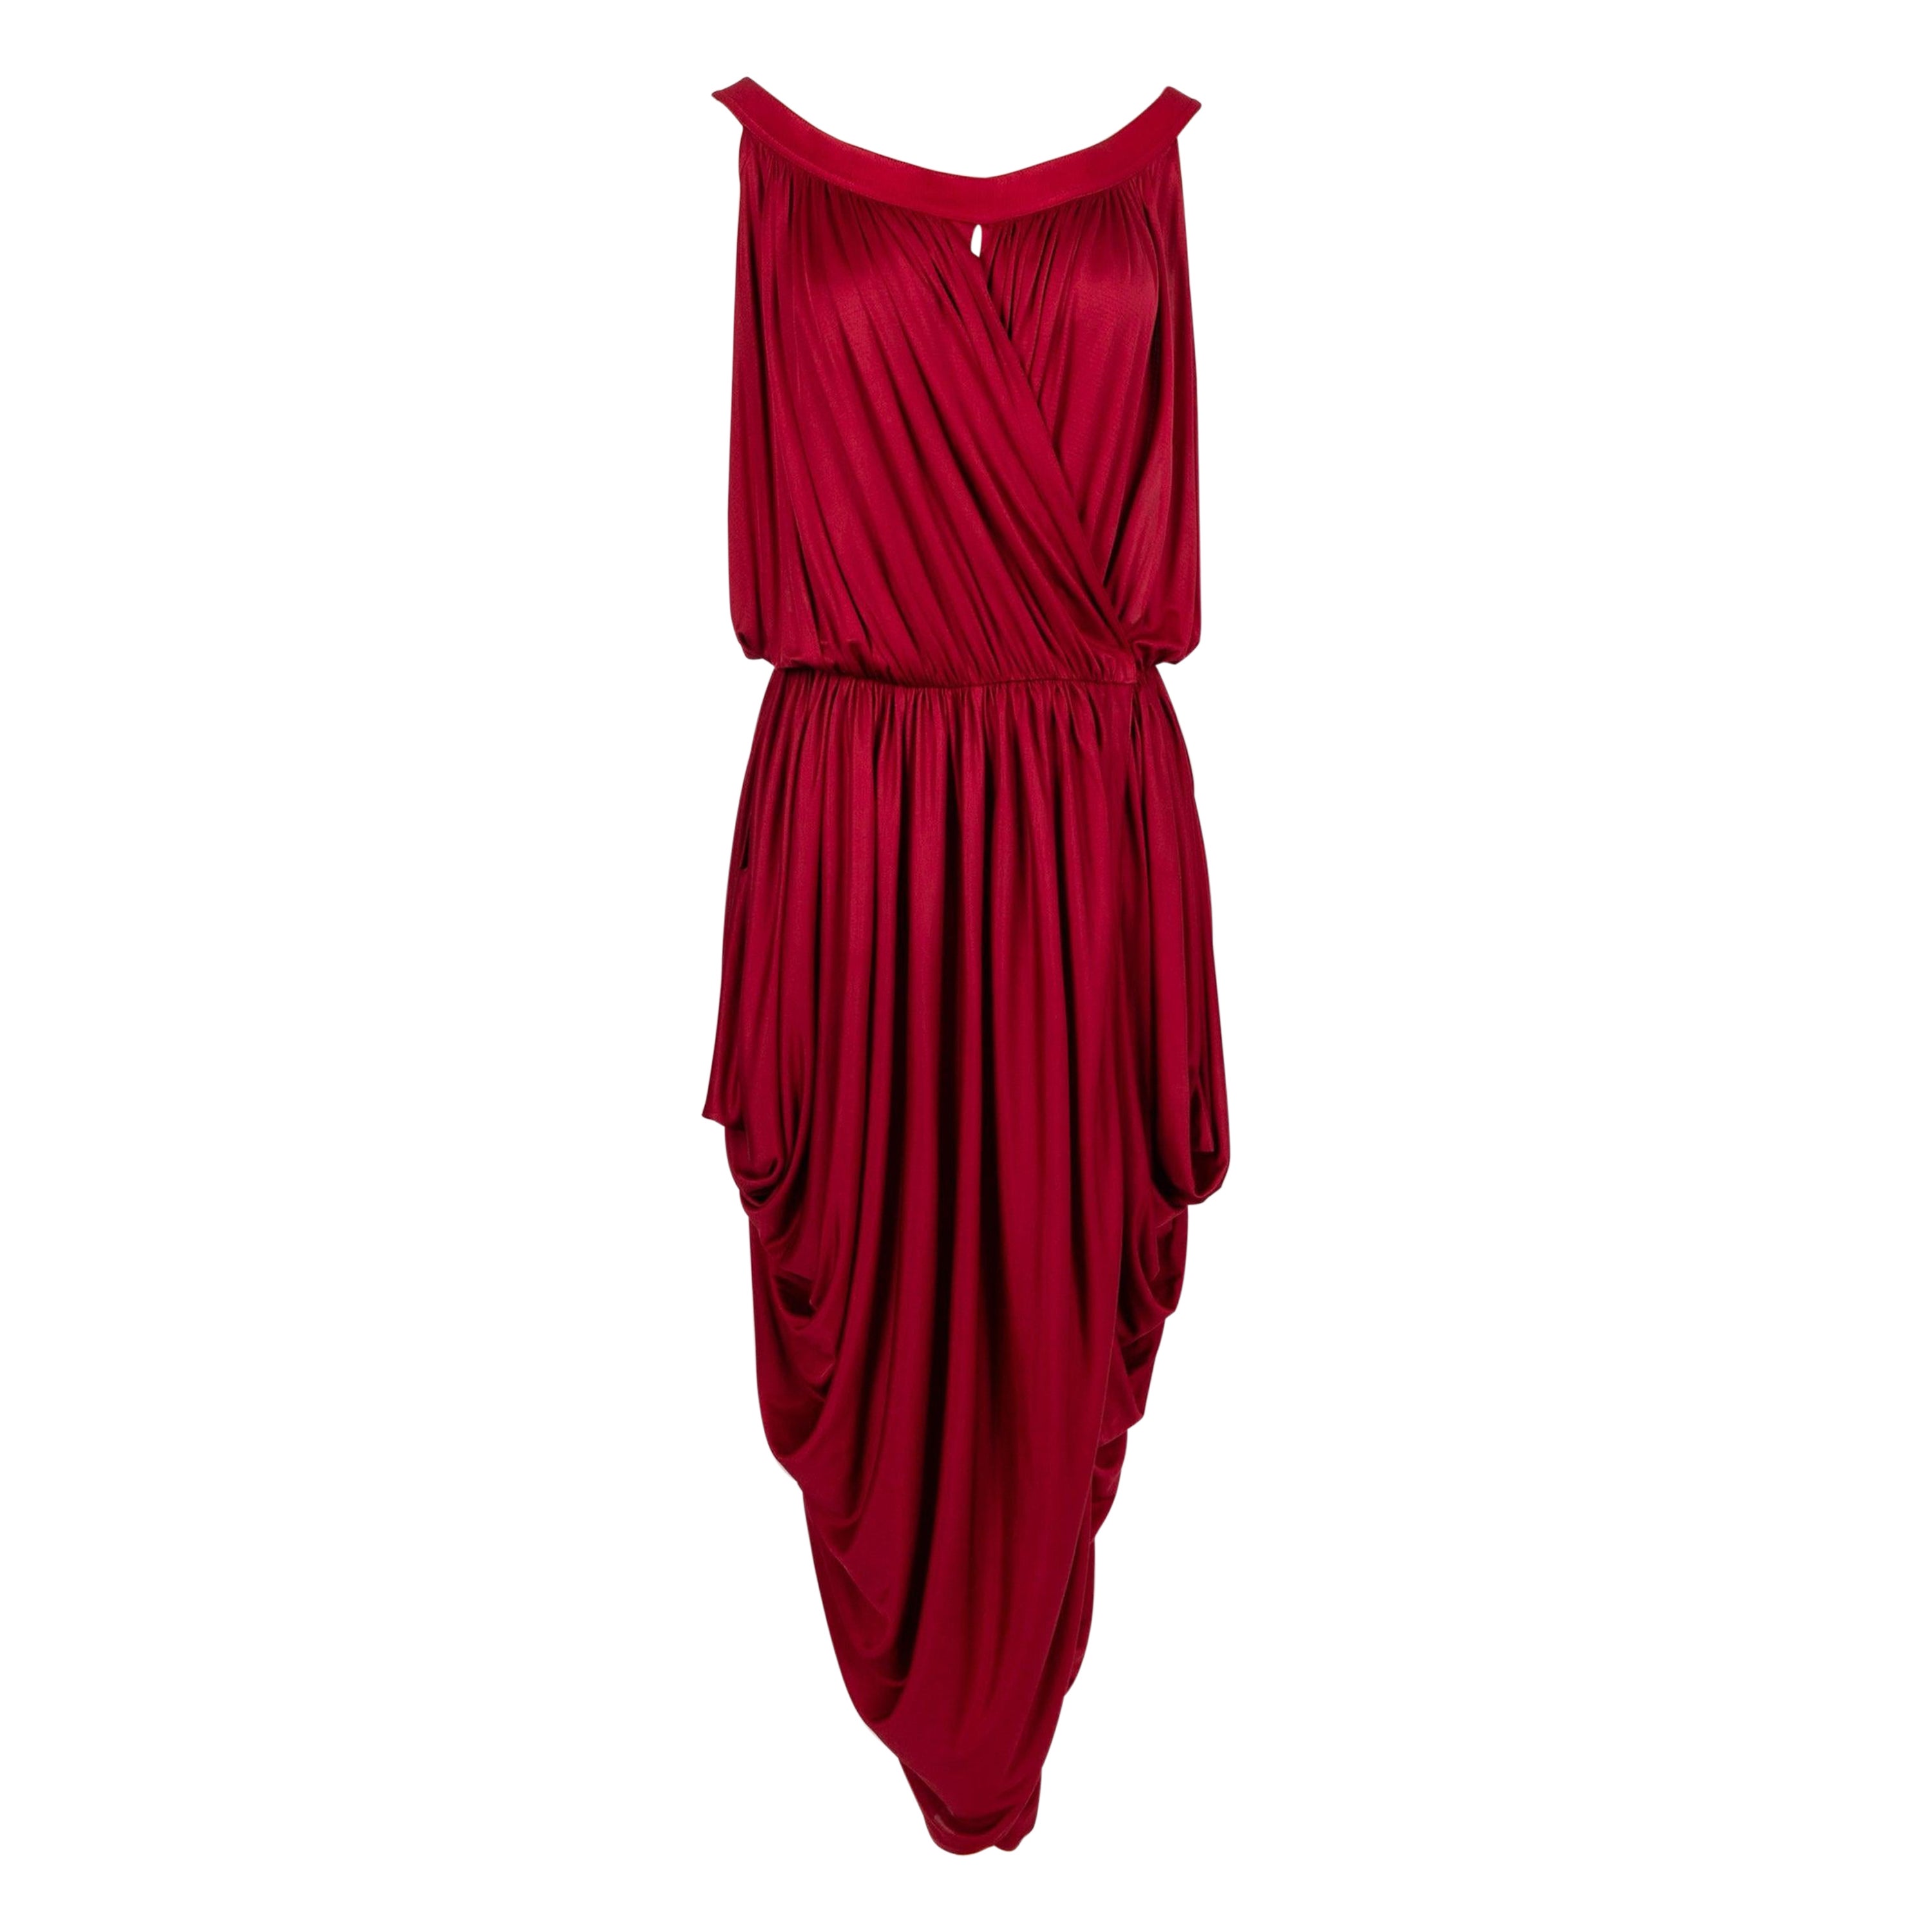 Gianni Versace Silk Pleated Dress, 1980s For Sale